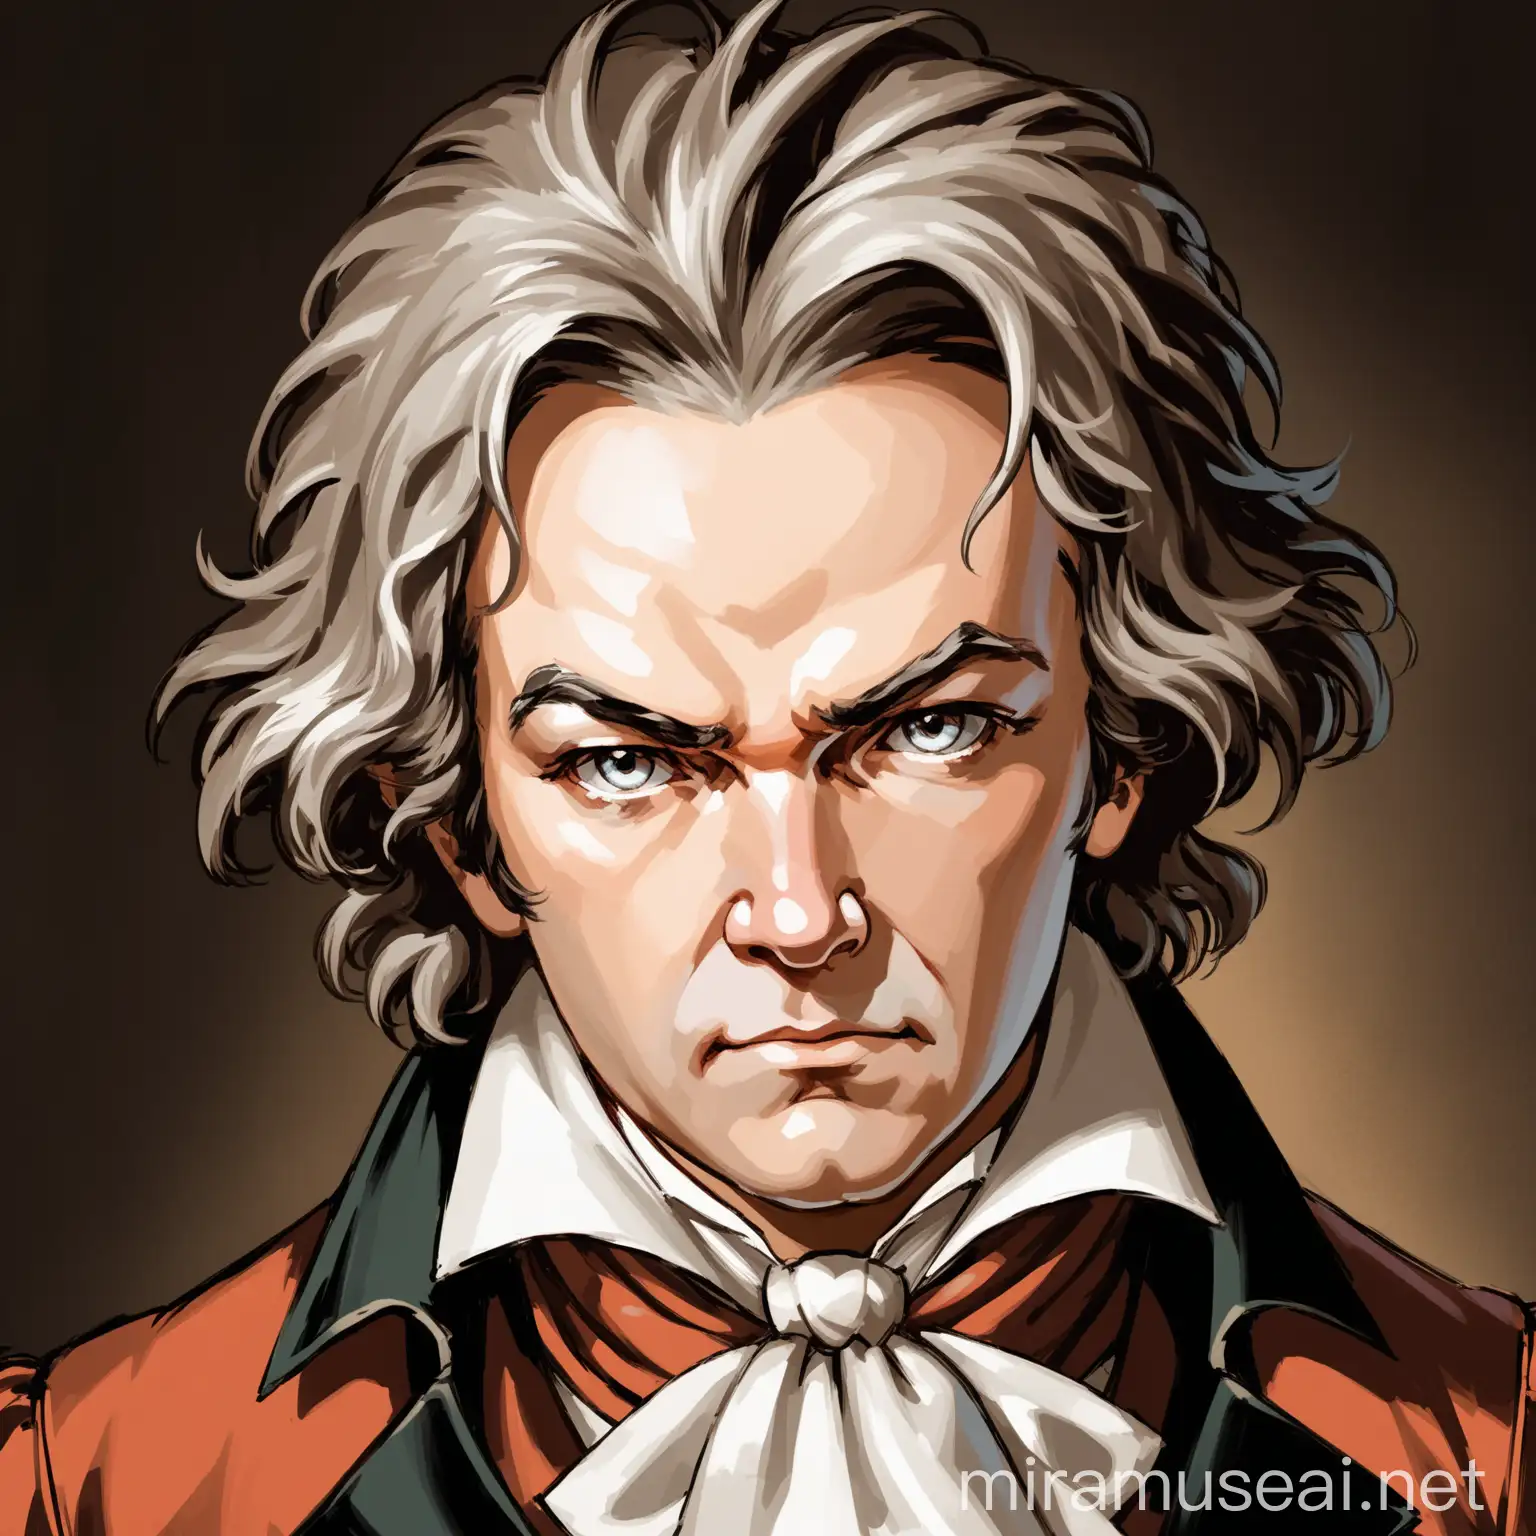 a frontal picture of Ludwig van Beethoven looking at the camera,Feature a captivating frontal portrait of Ludwig van Beethoven making direct eye contact with the camera.